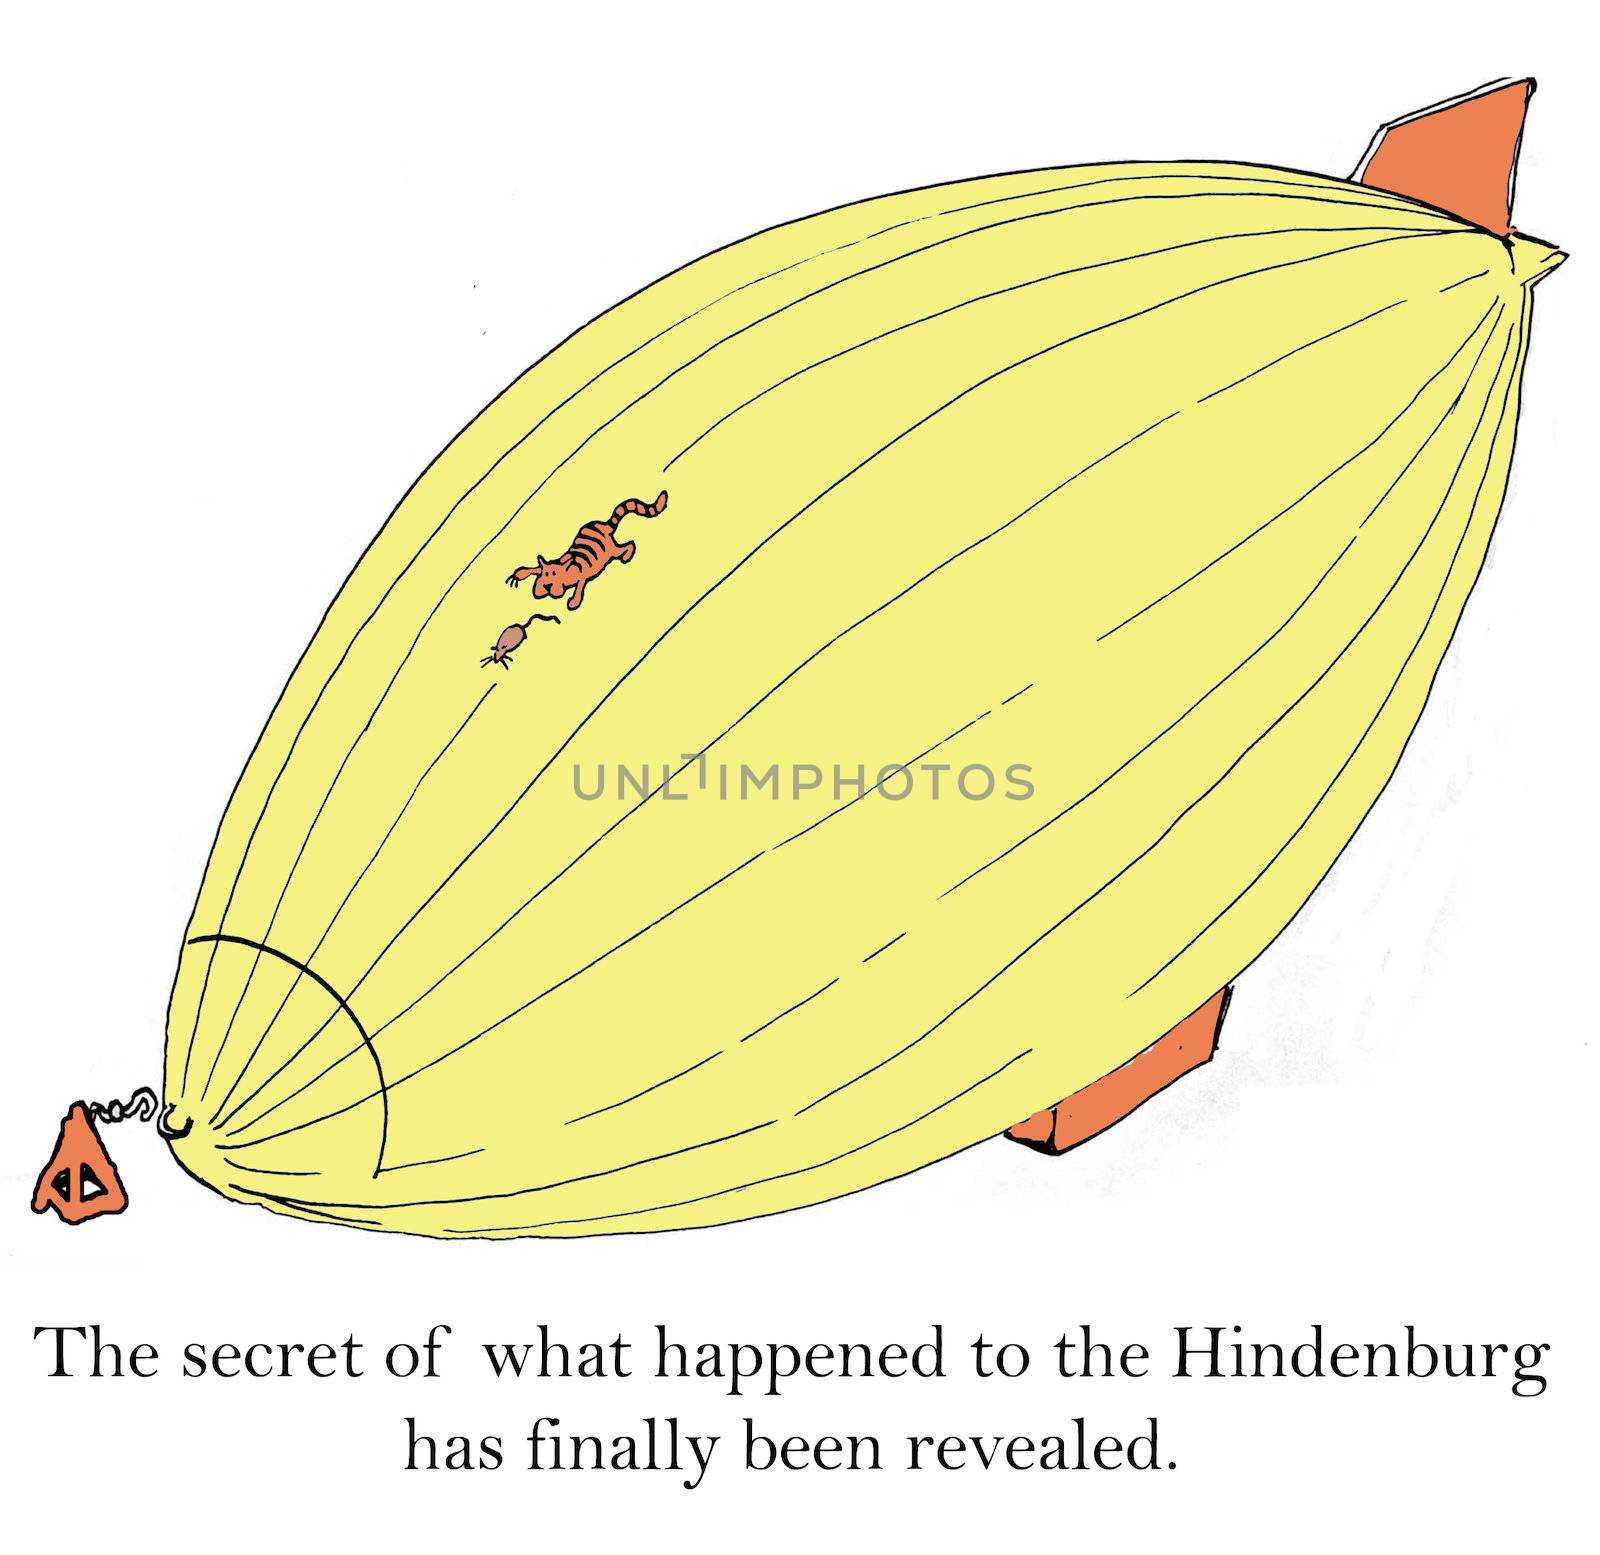 The secret of what happened to the Hindenburg has finally been revealed.